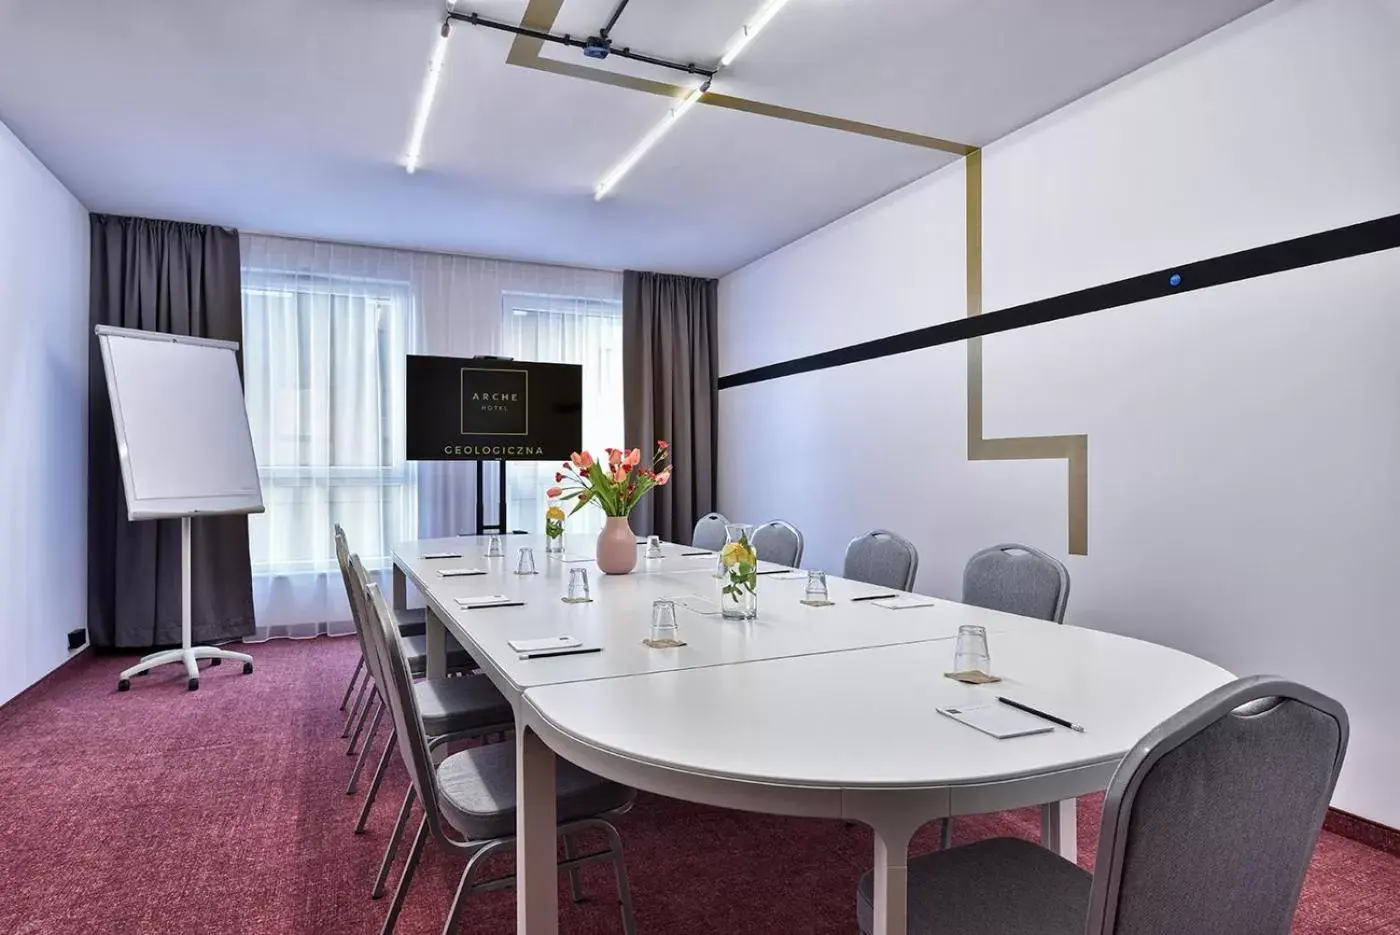 Business facilities in Hotel Arche Geologiczna